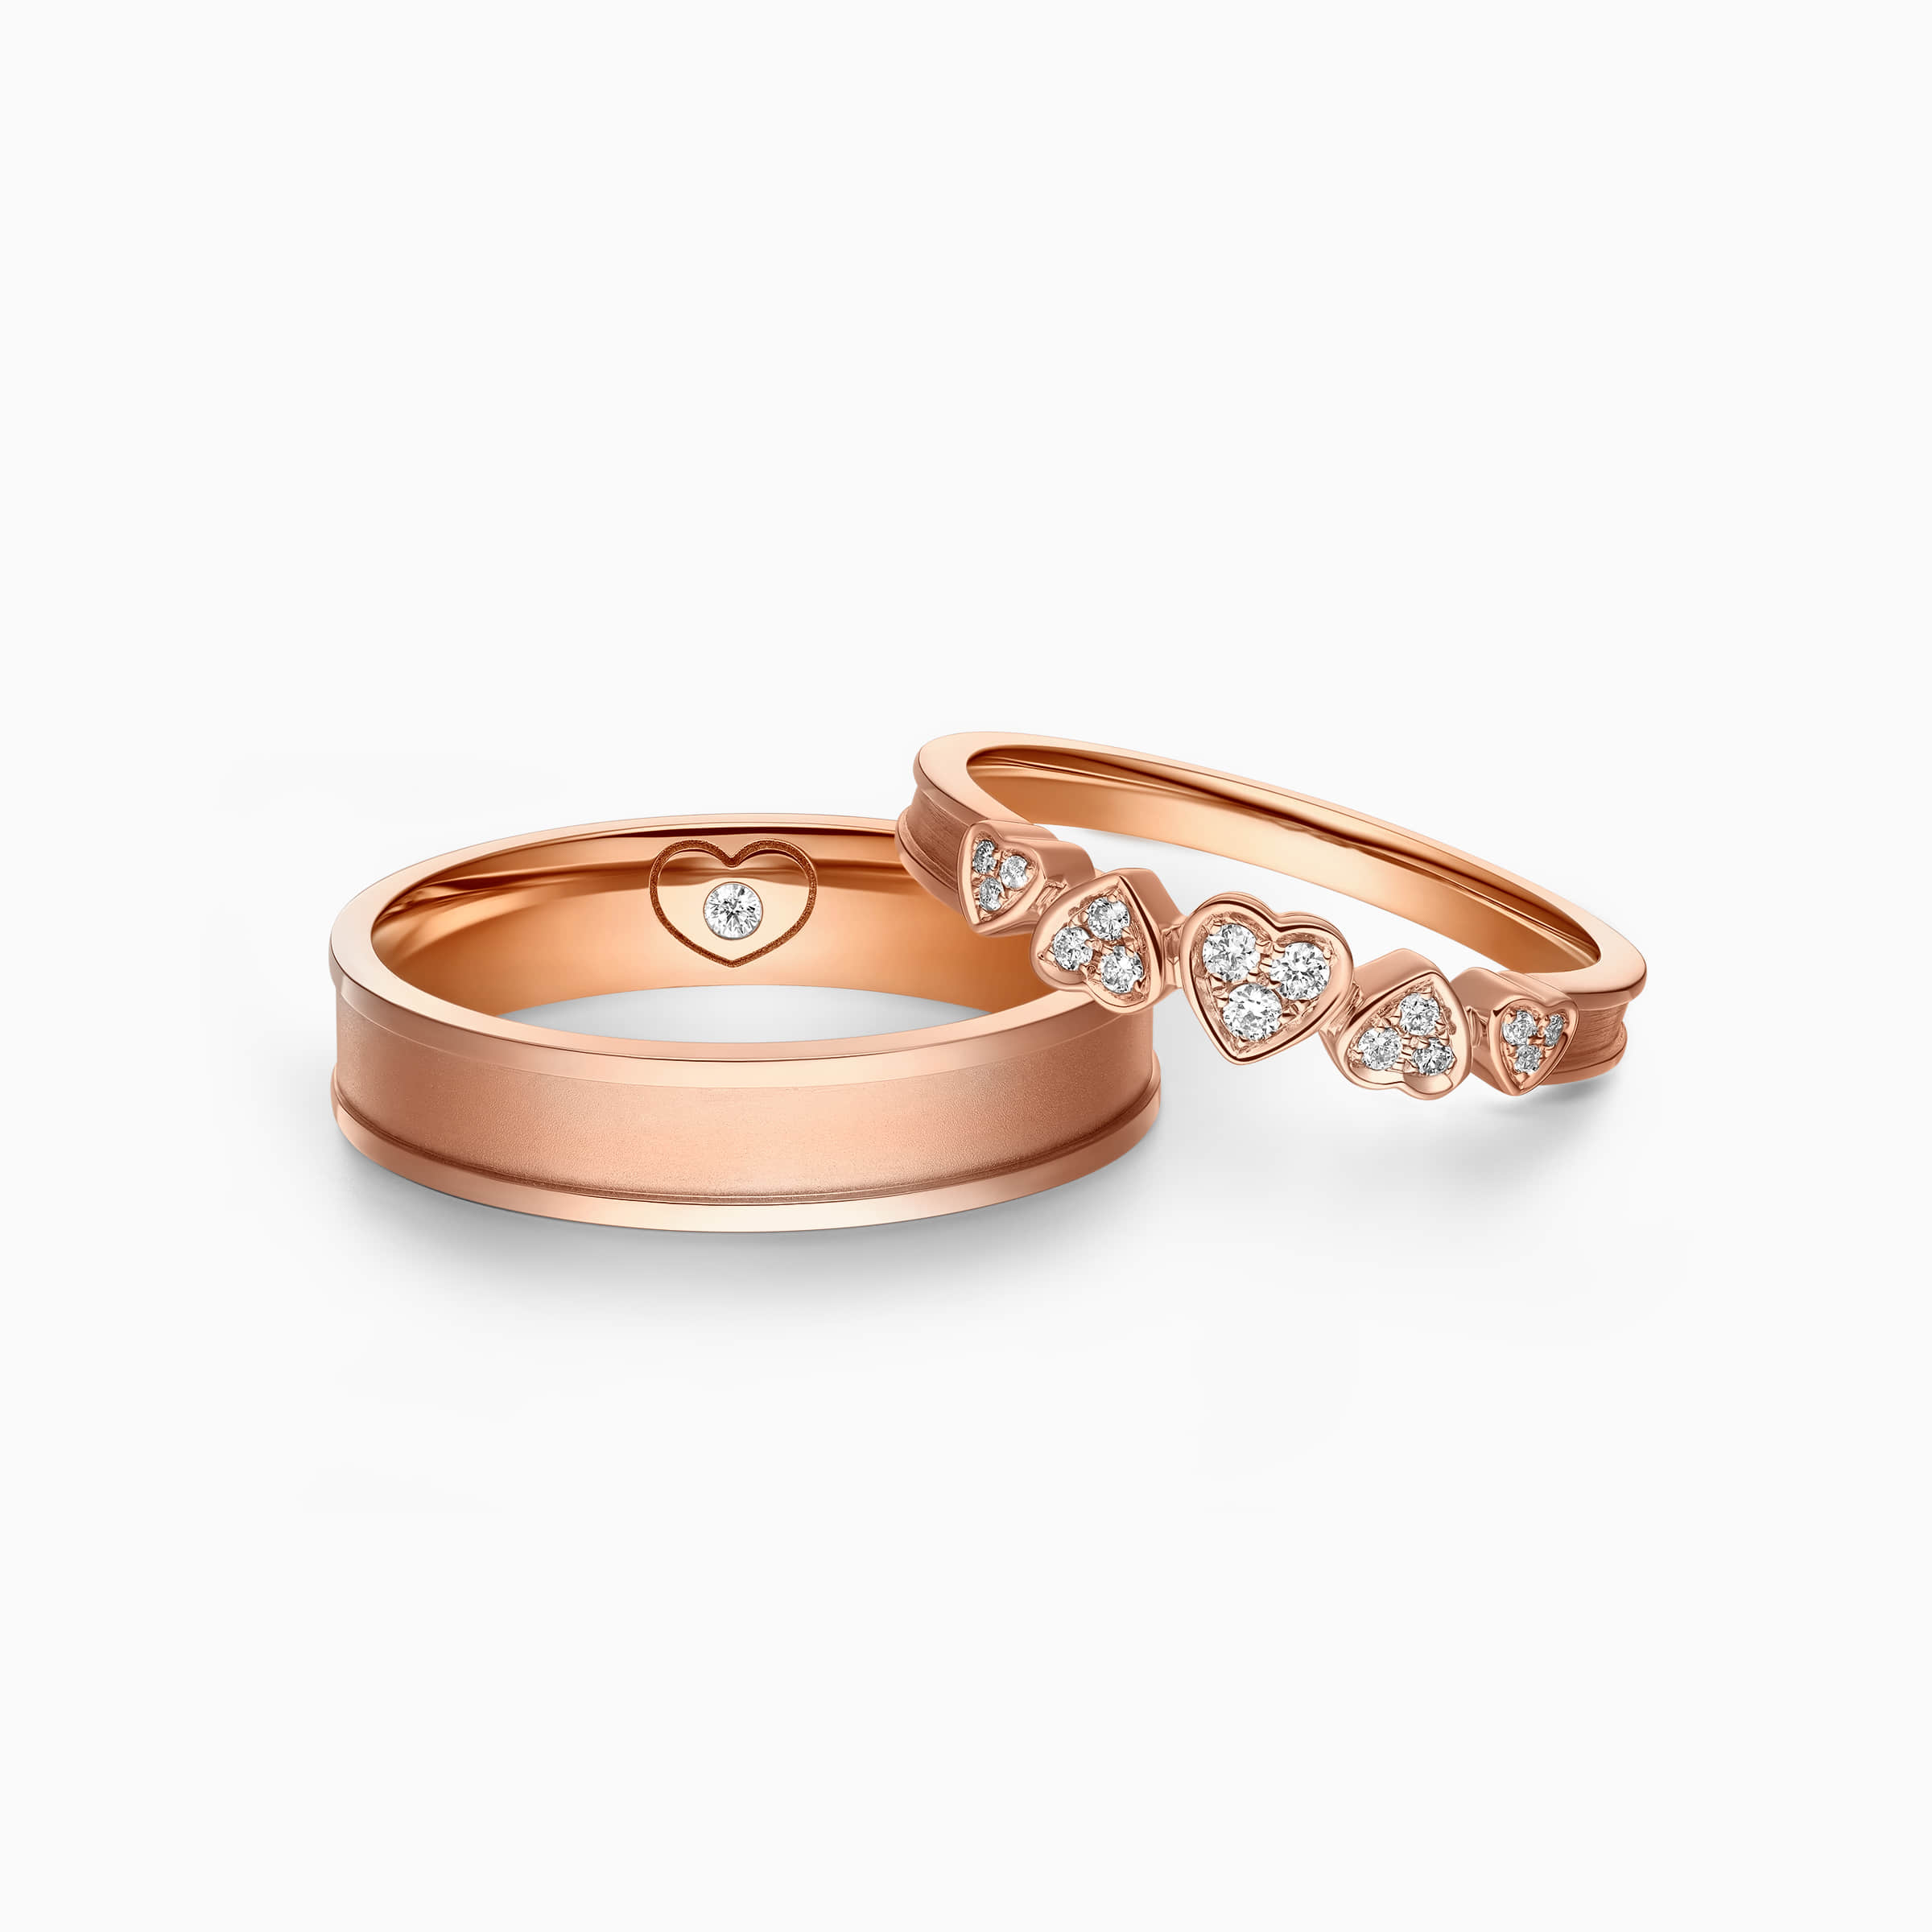 Darry Ring heart wedding ring sets for him and her in rose gold